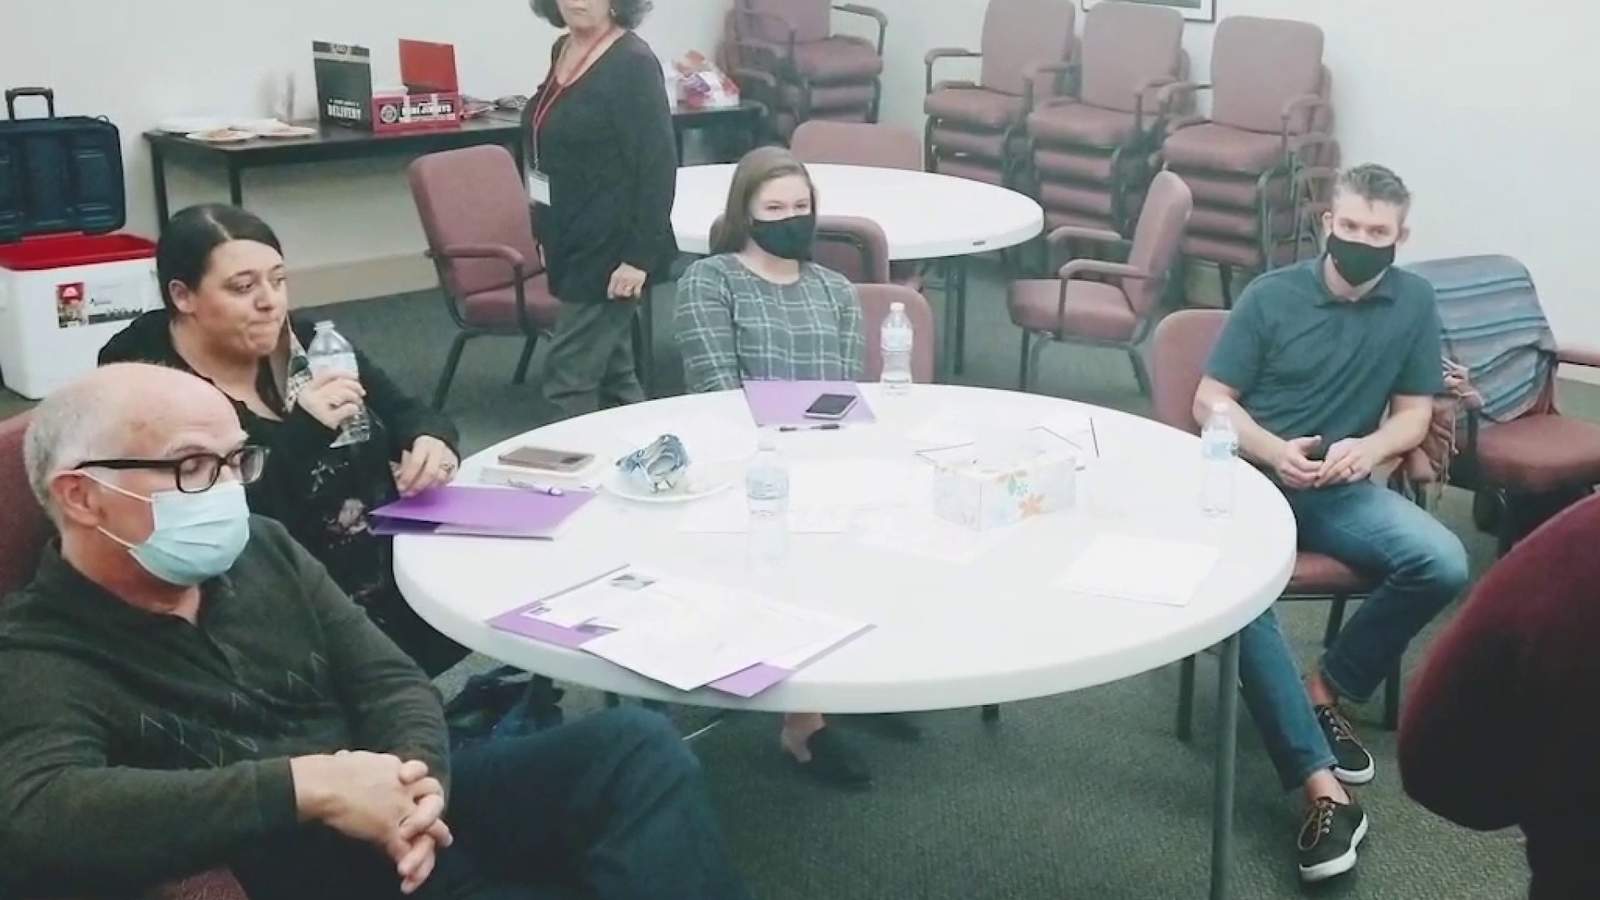 ‘A ray of hope’: Church leaders gain new skills with faith-based domestic violence response training